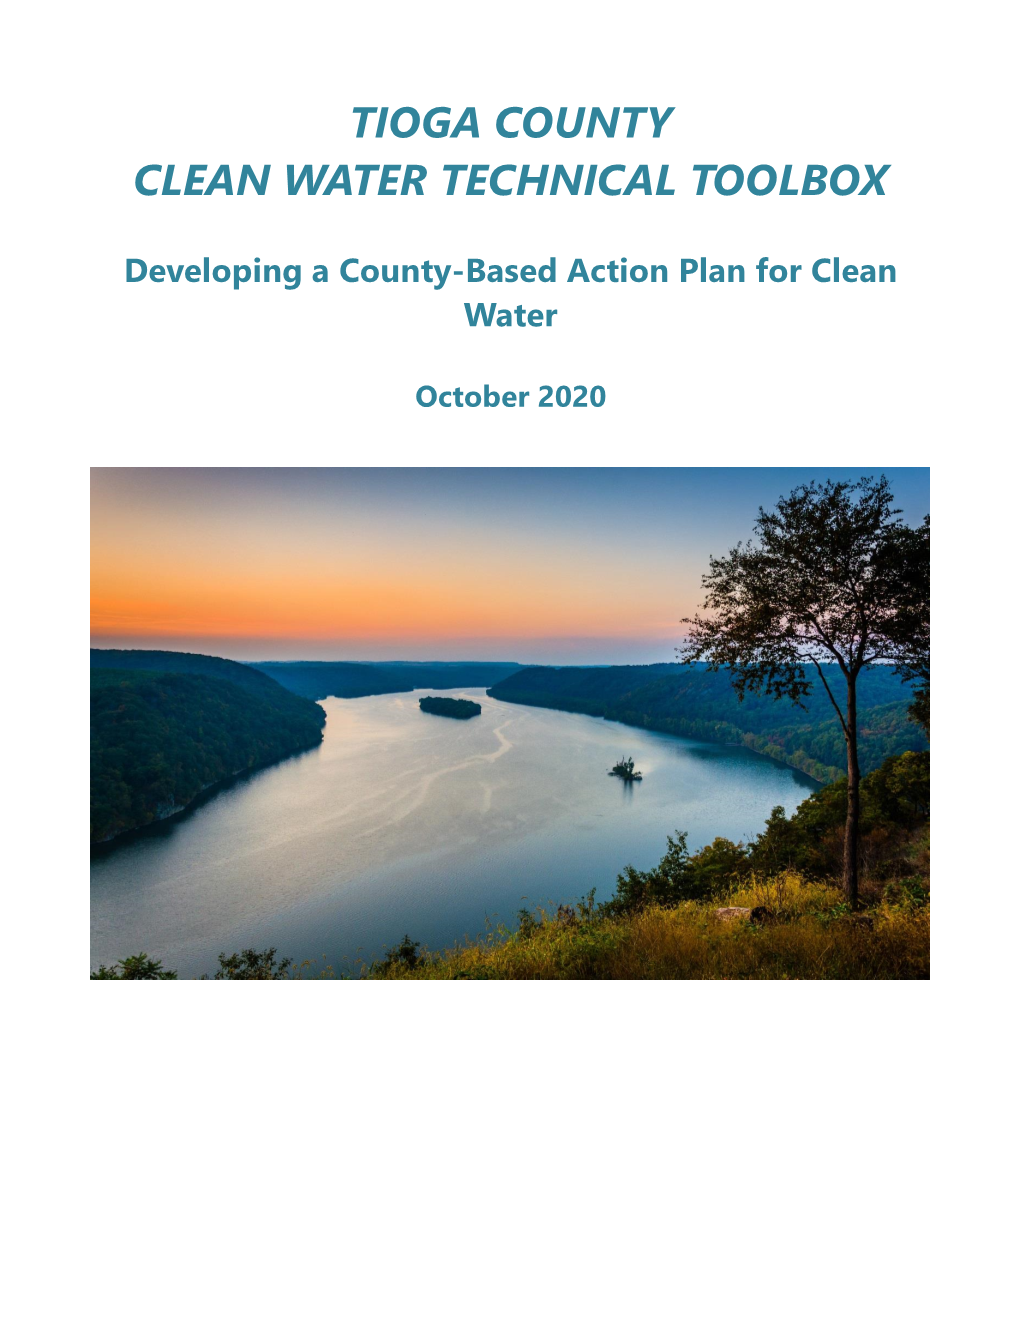 Tioga County Clean Water Technical Toolbox